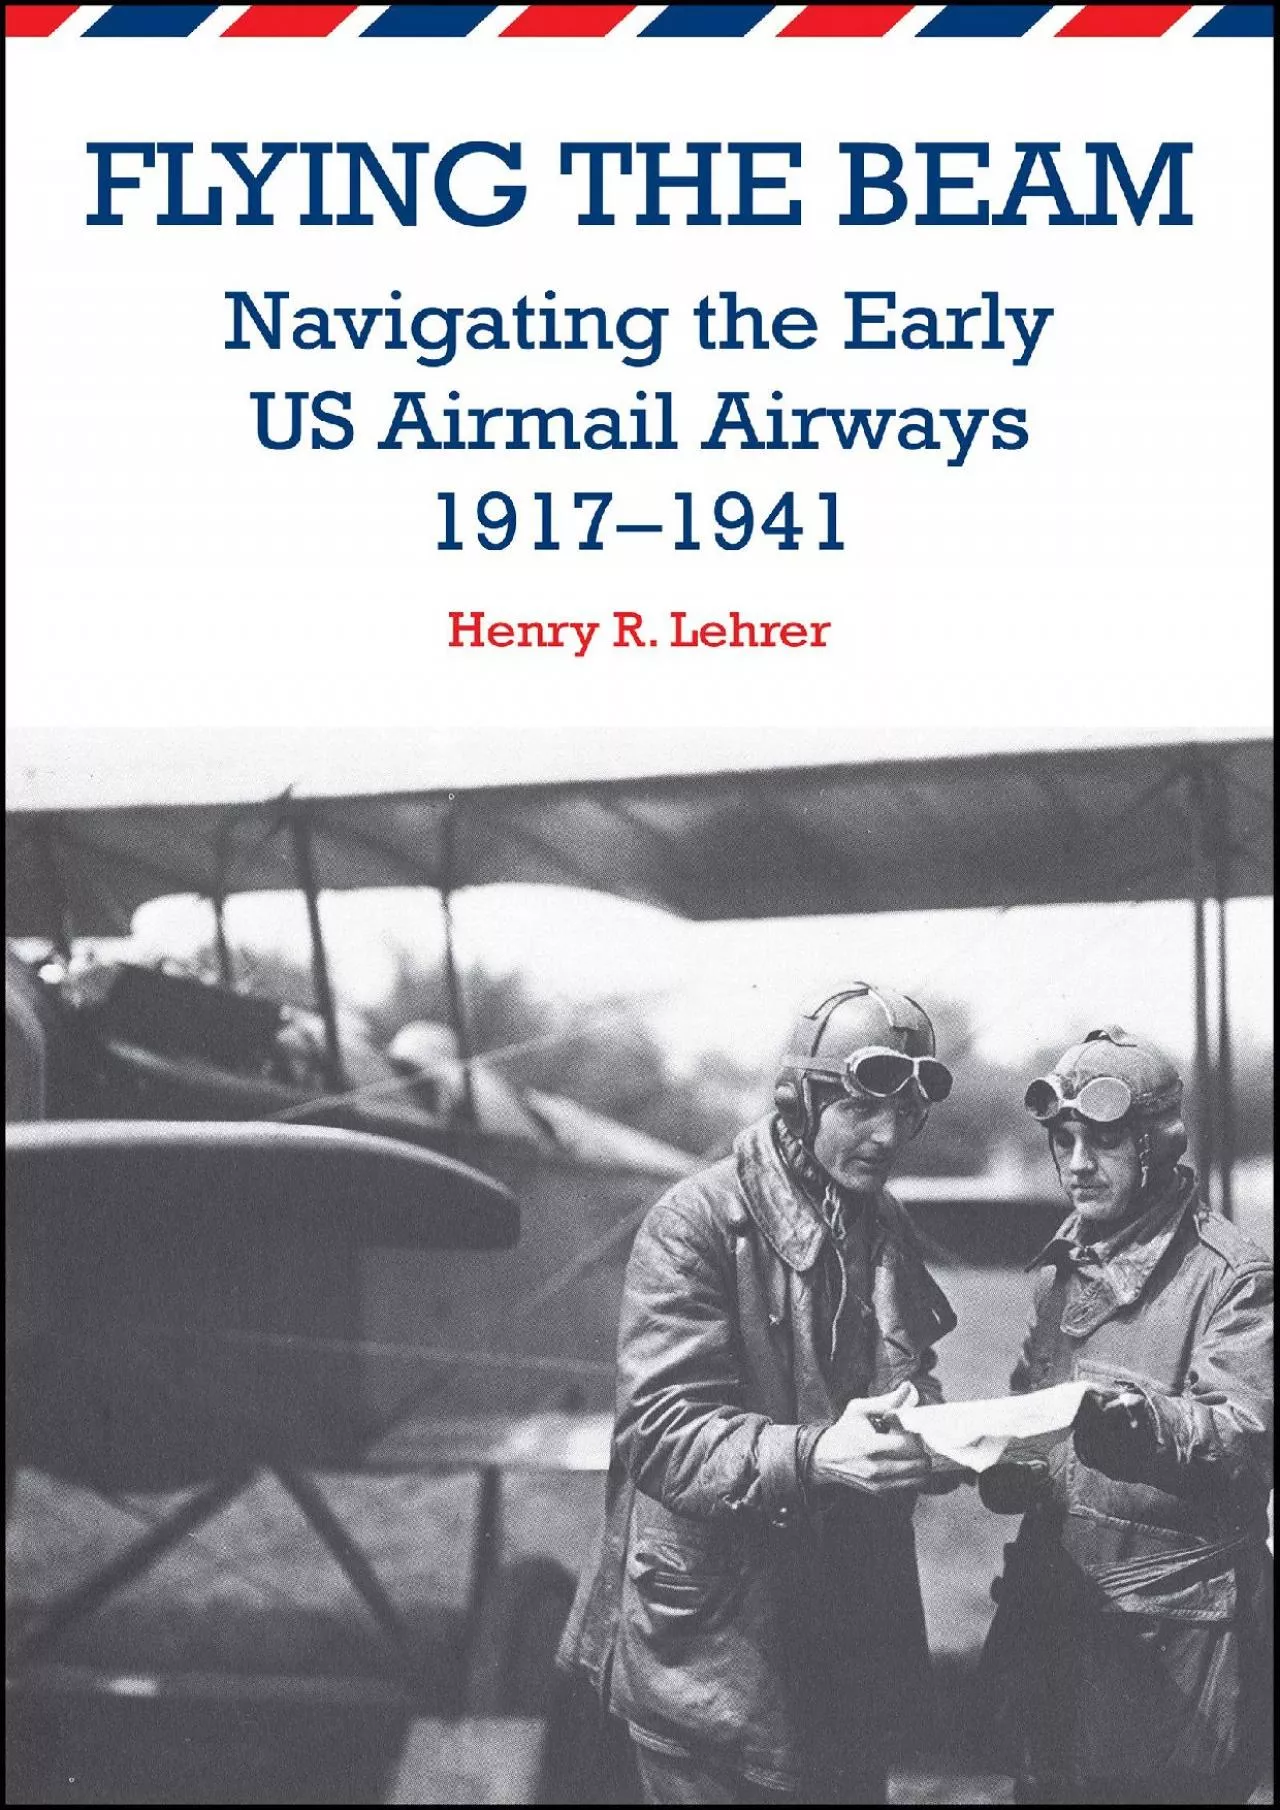 (BOOK)-Flying the Beam: Navigating the Early US Airmail Airways, 1917-1941